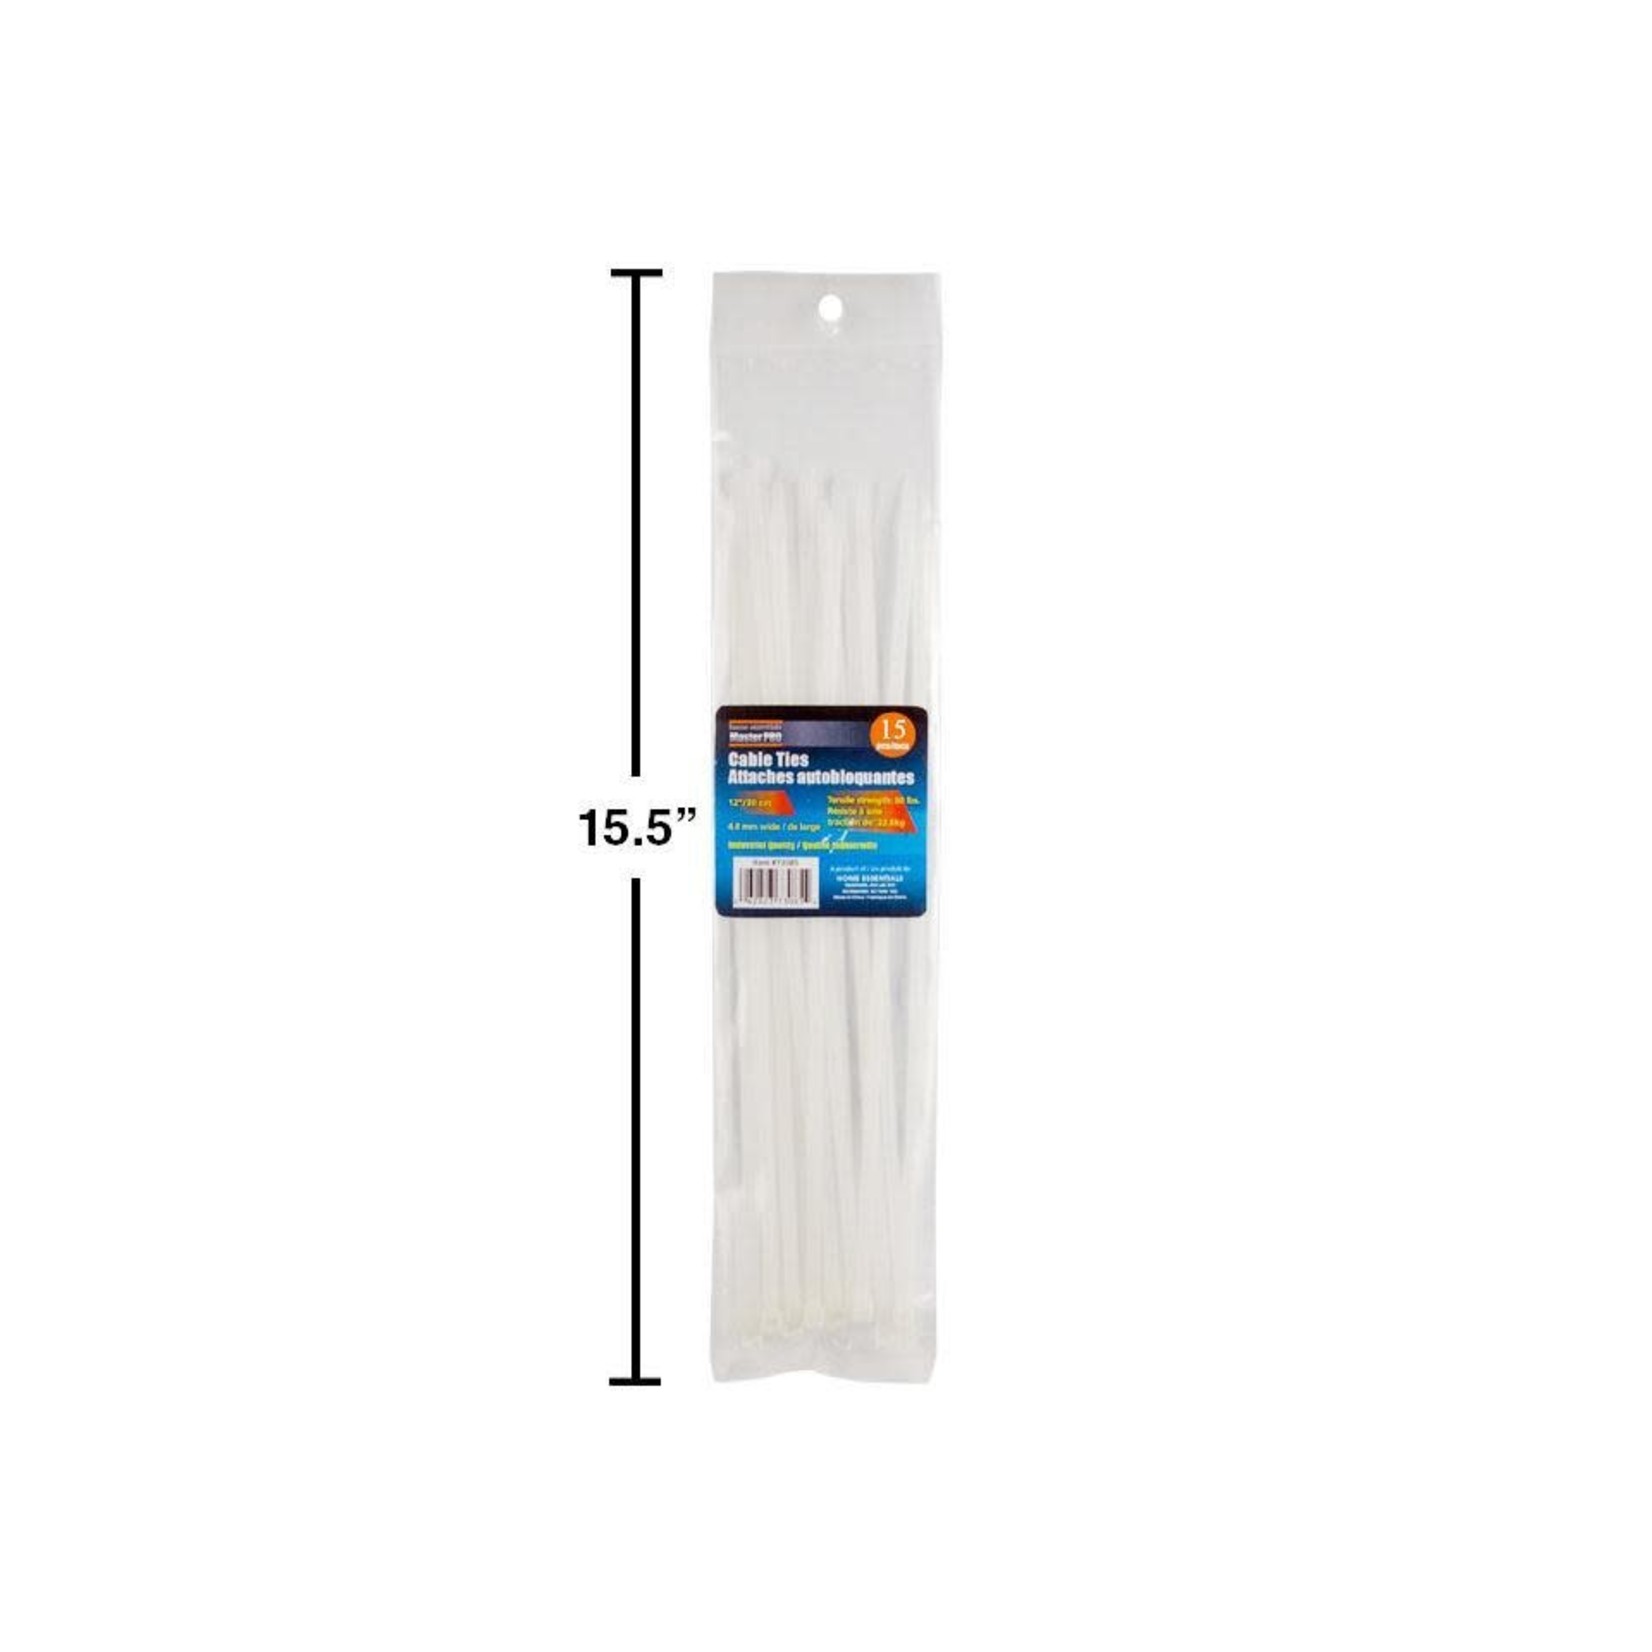 CABLE TIES,15 PCS - 12''